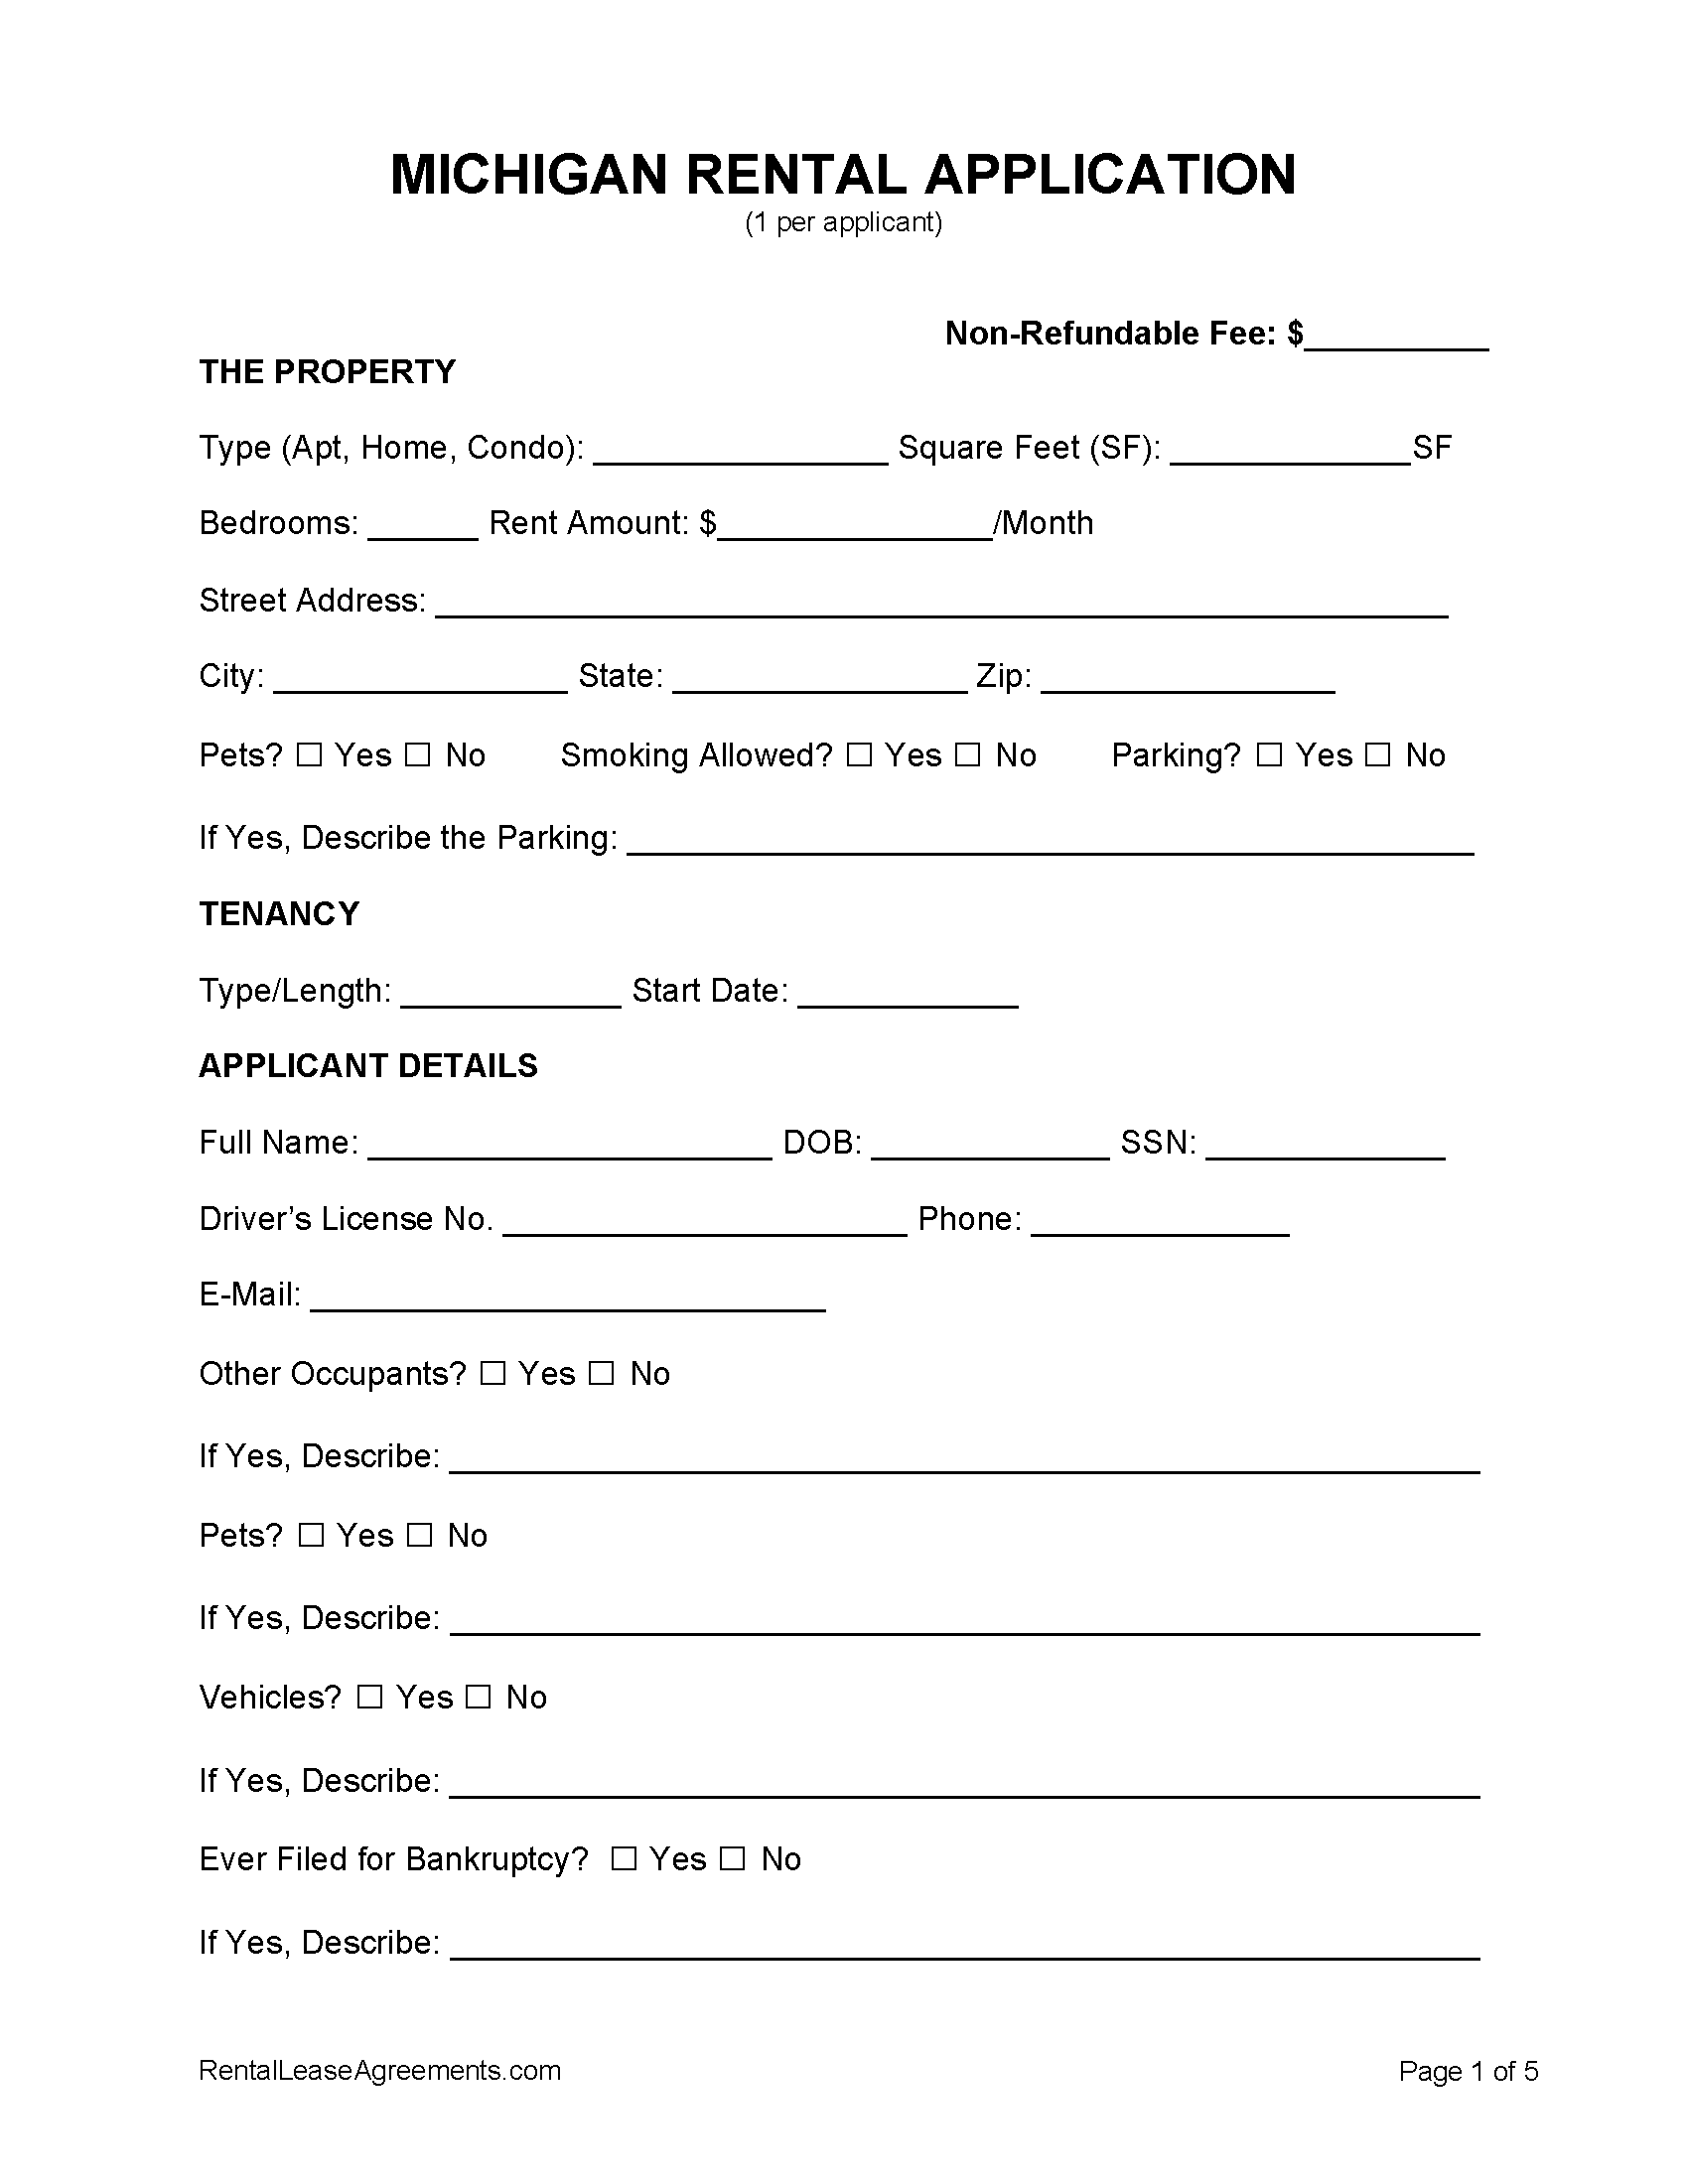 Printable Rental Application Template from rentalleaseagreements.com